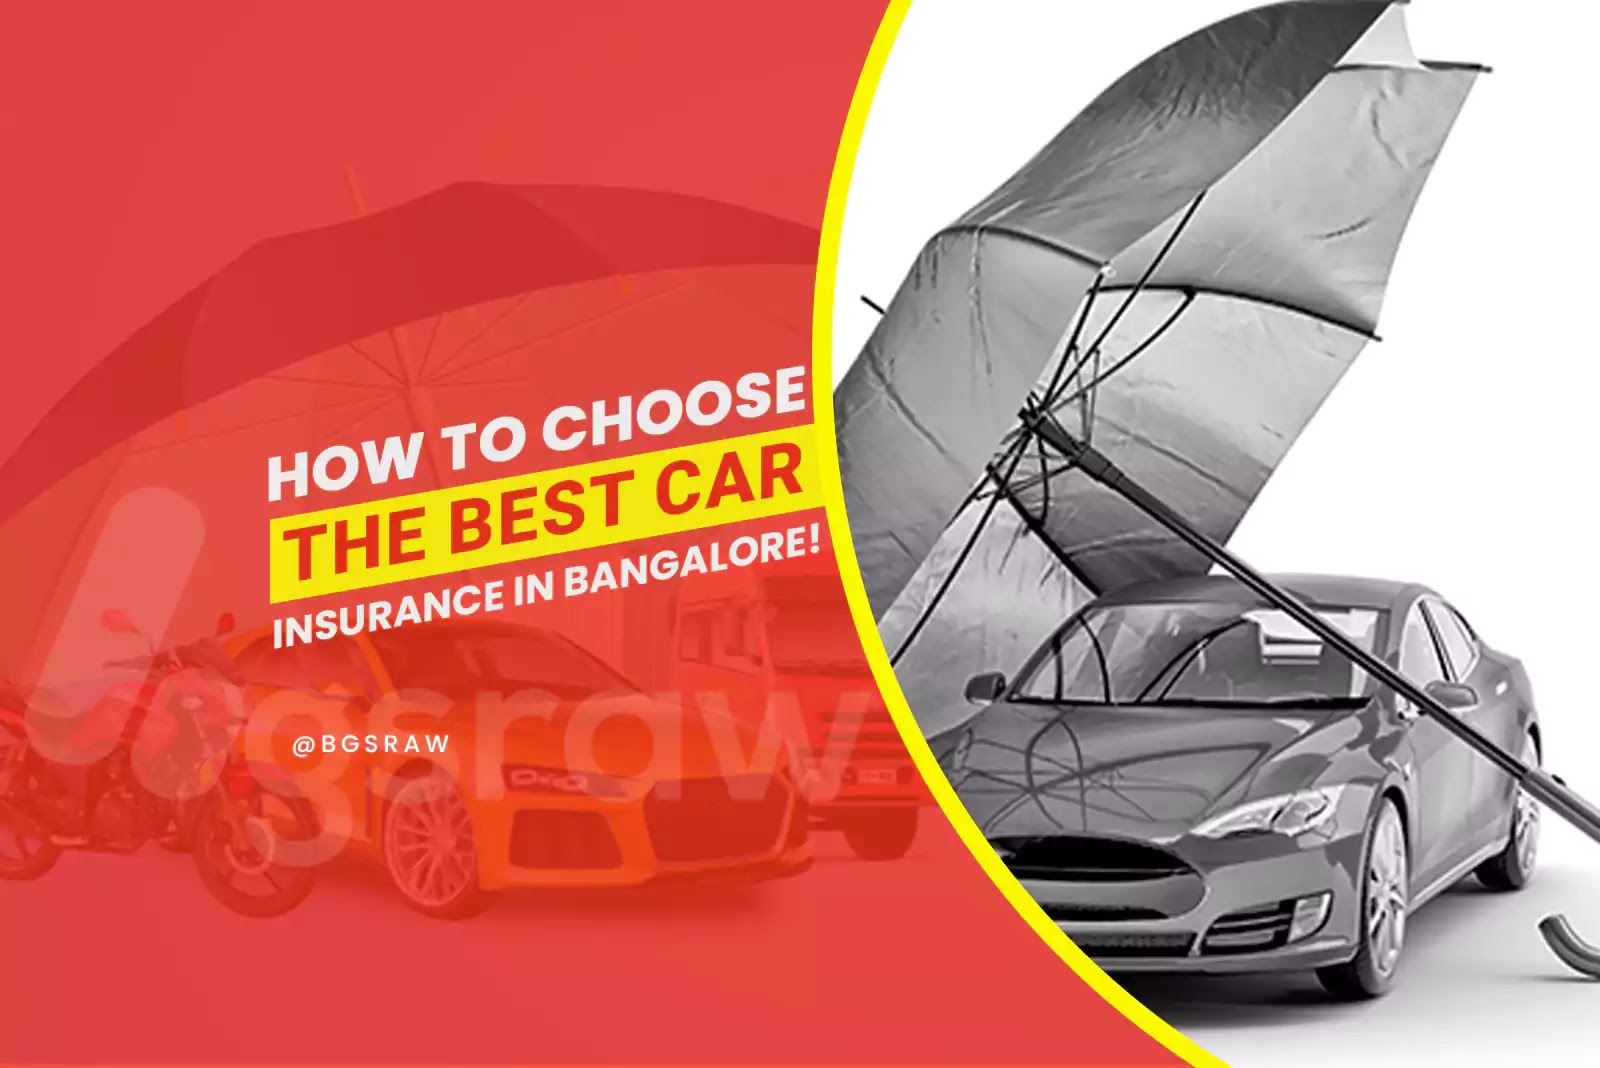 How To Choose The Best Car Insurance in Bangalore